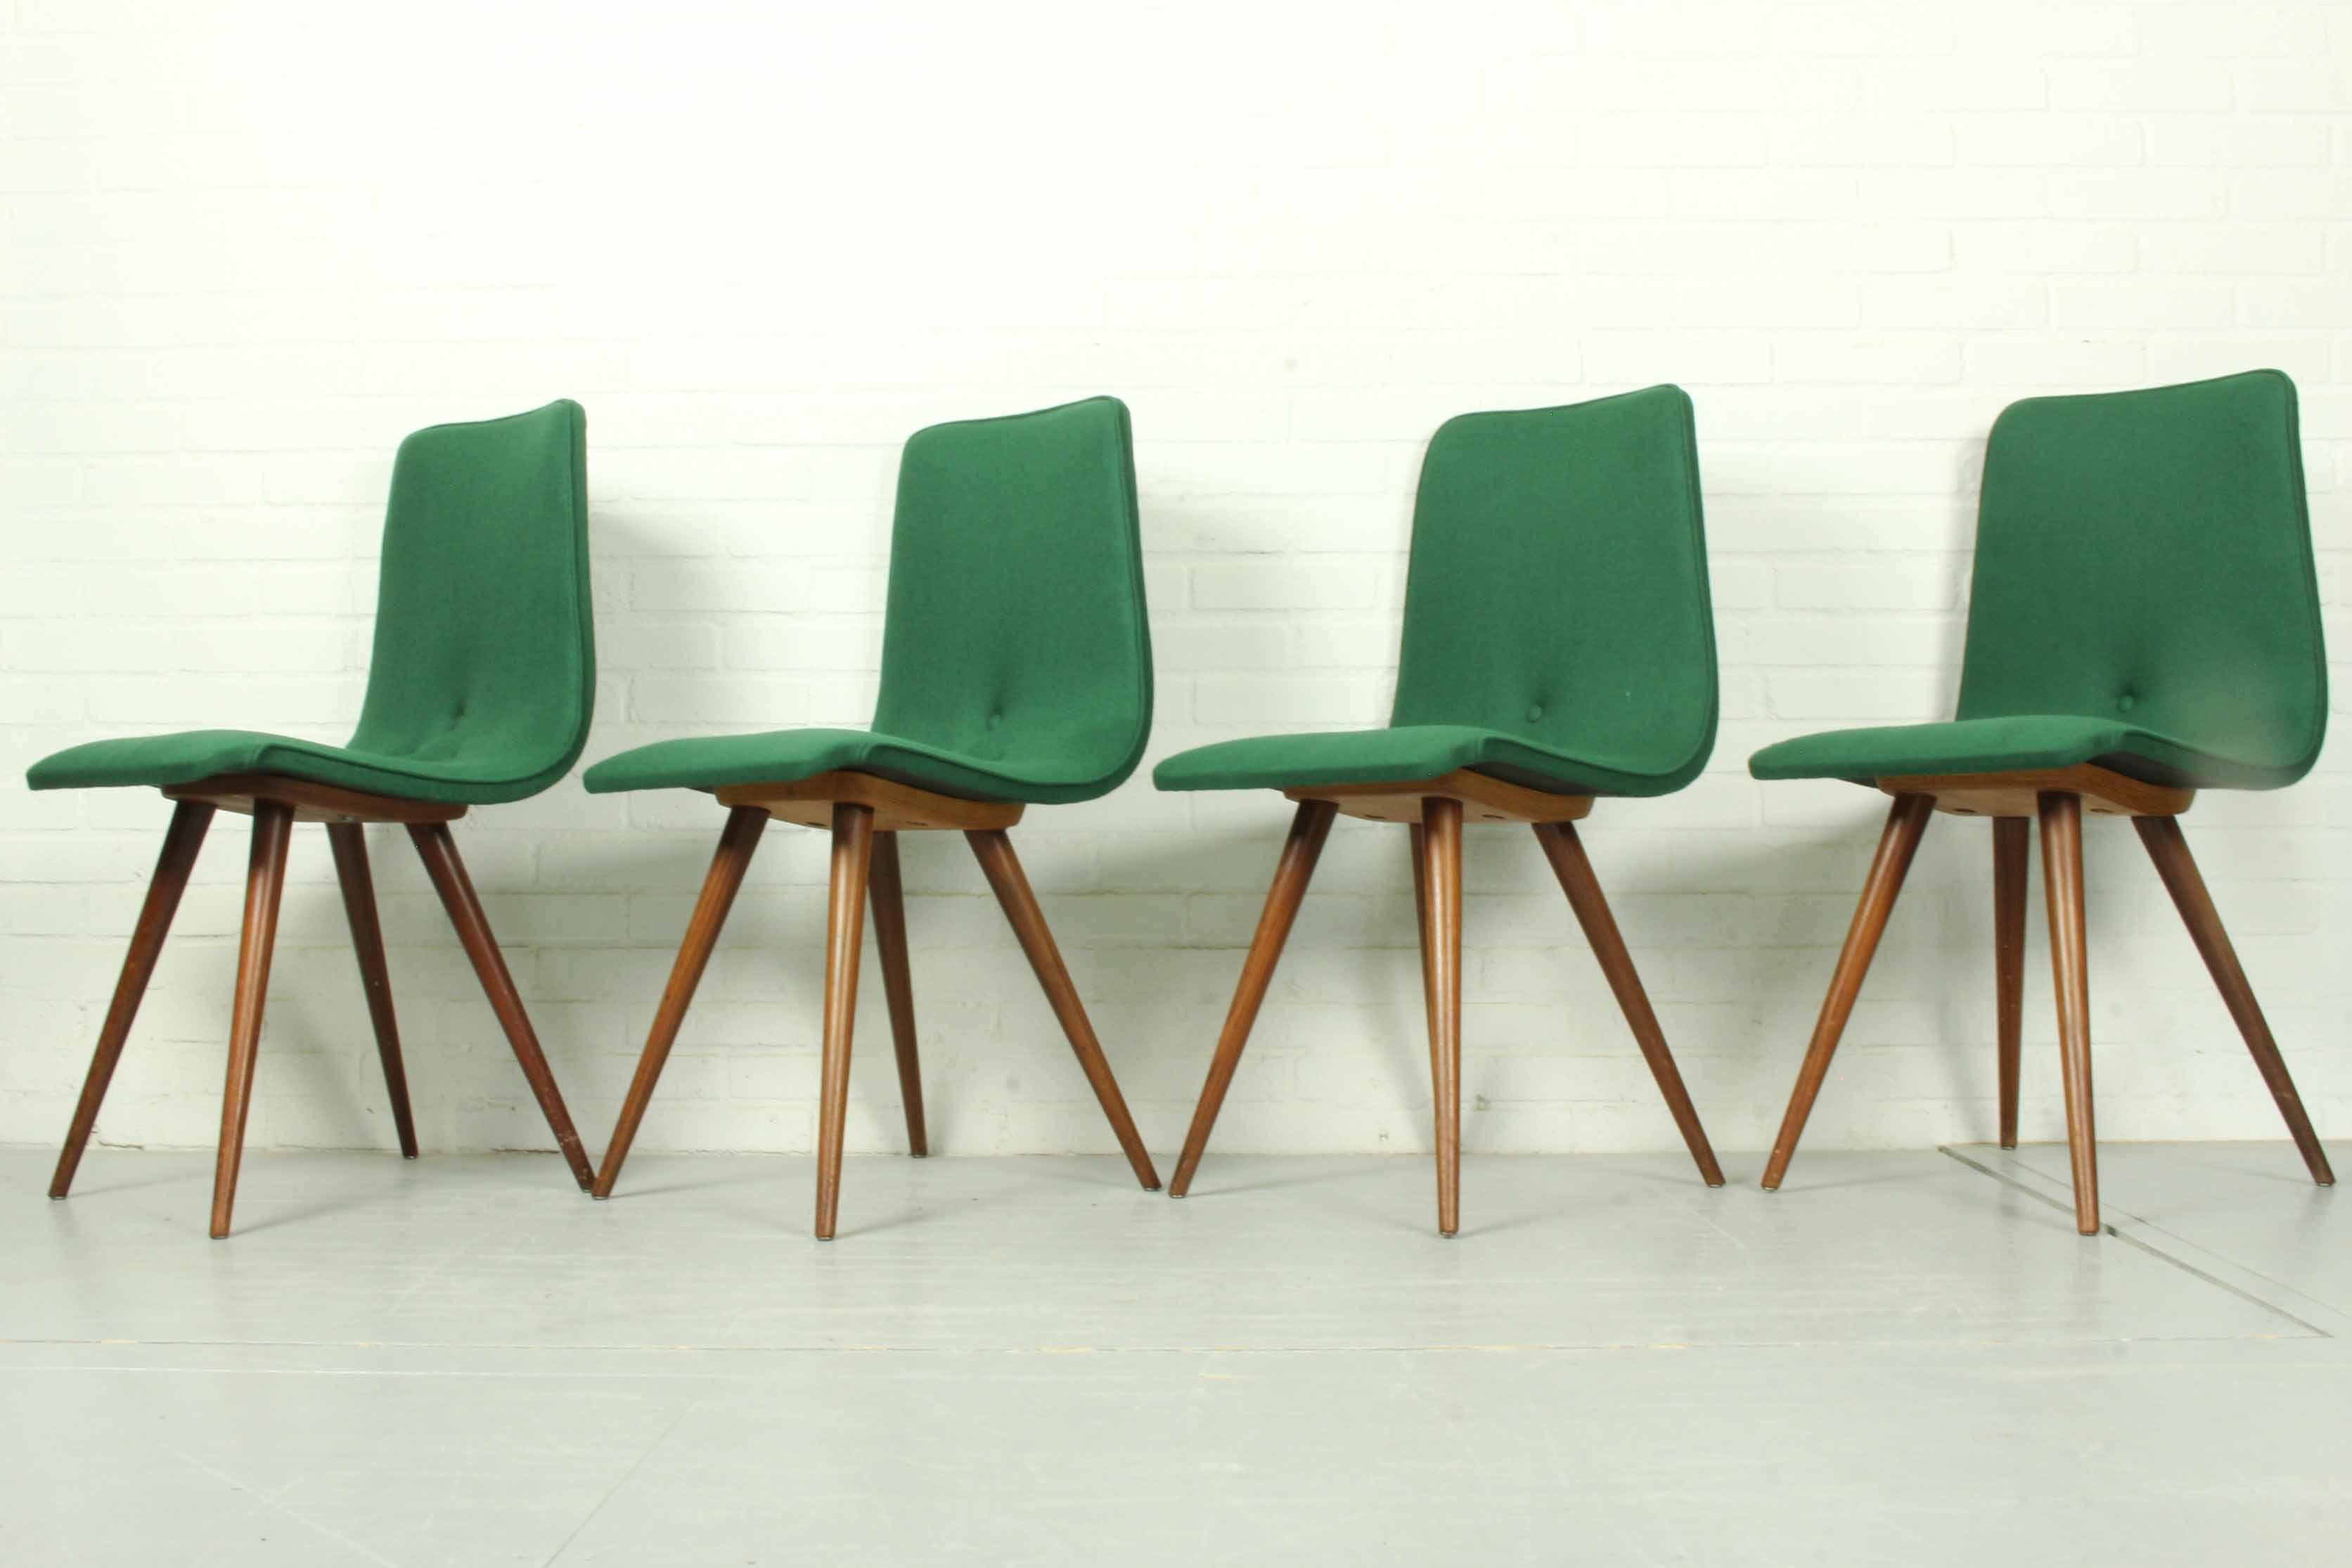 Dutch Set of 4 Teak Dining Chairs by Van Os, 1950s For Sale